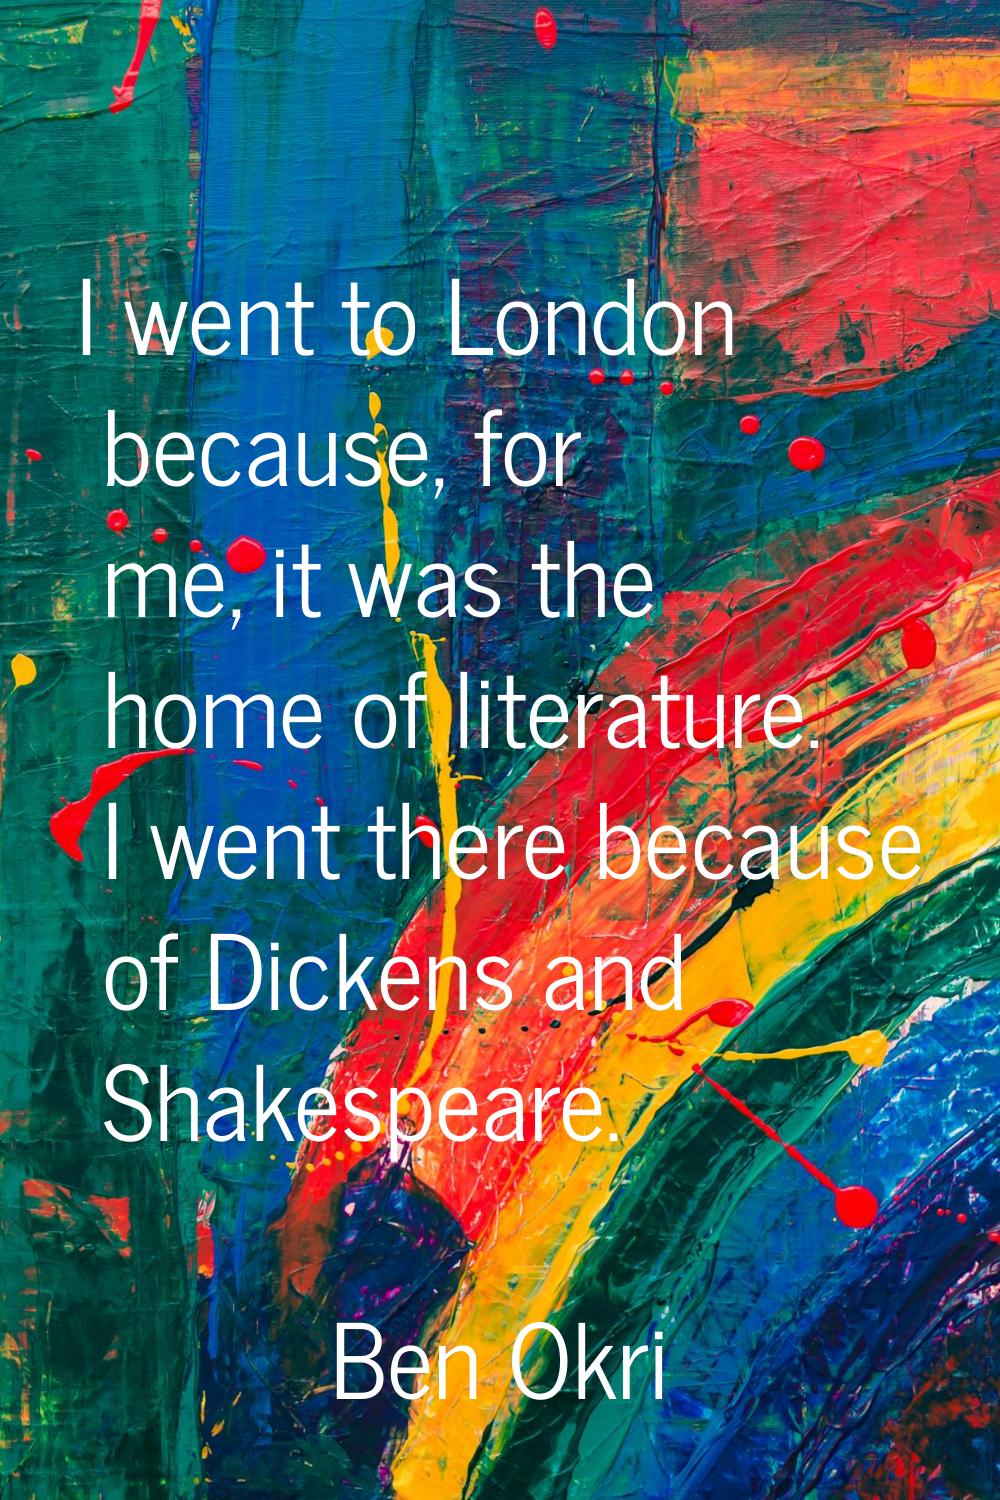 I went to London because, for me, it was the home of literature. I went there because of Dickens an